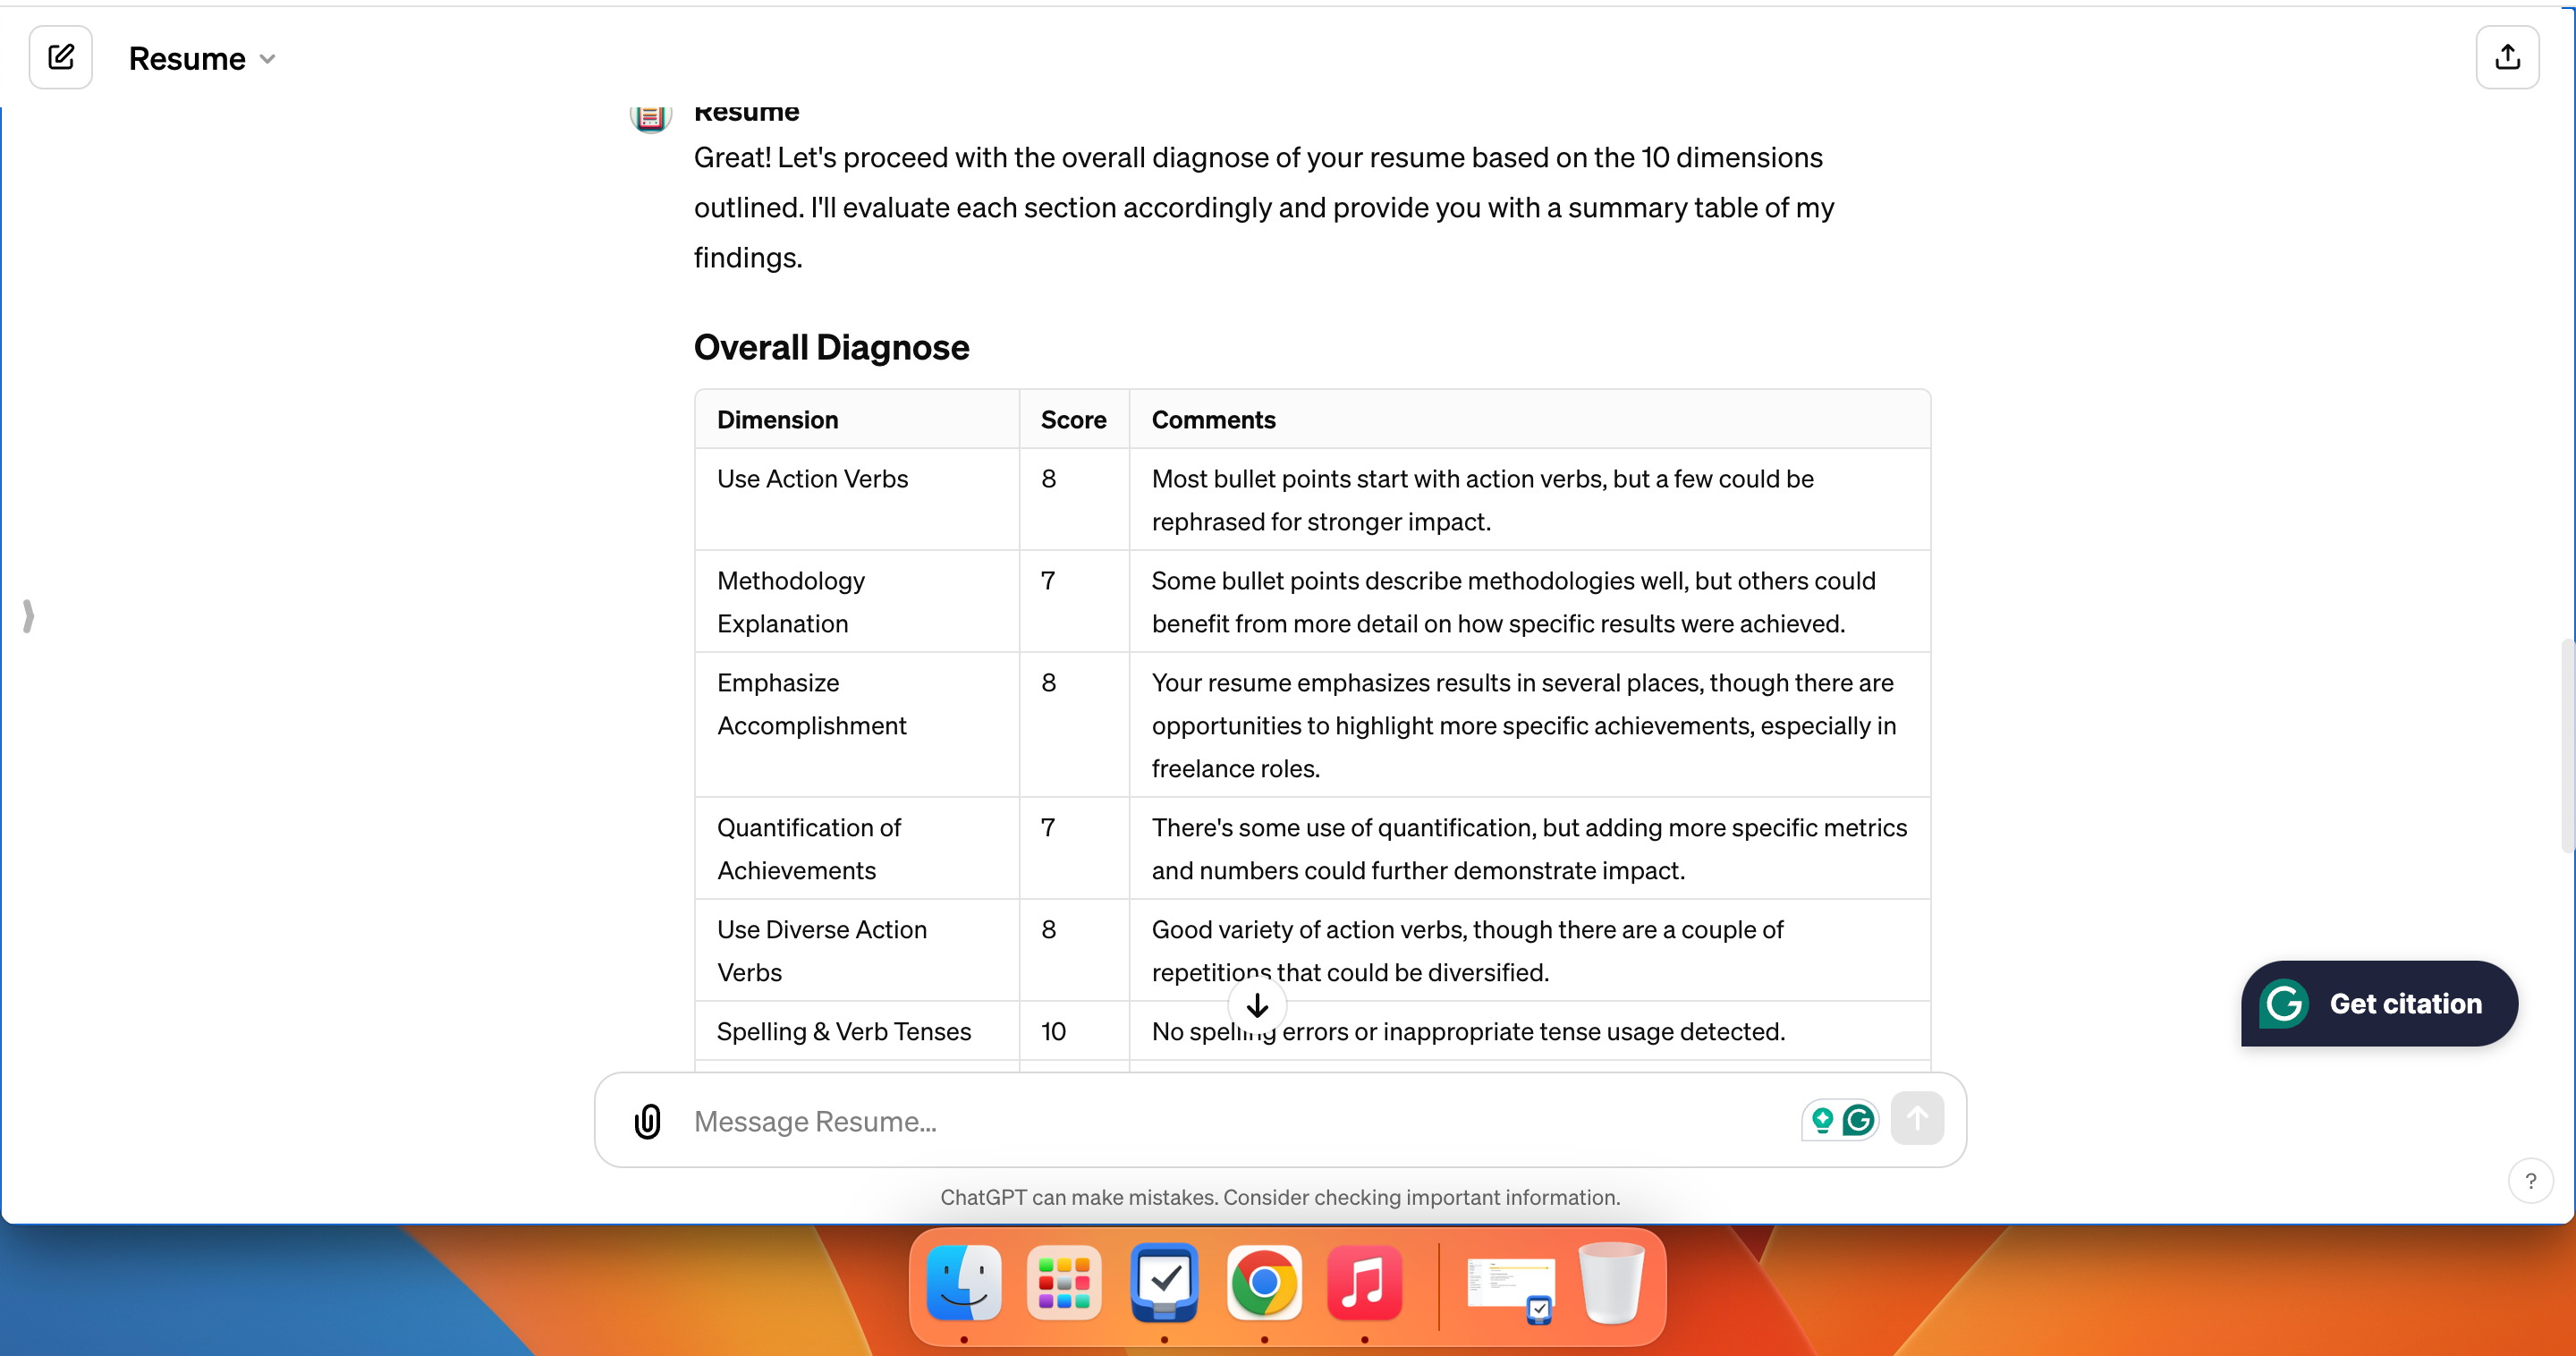 The Resume by jobbright.ai plugin offering feedback on a resume